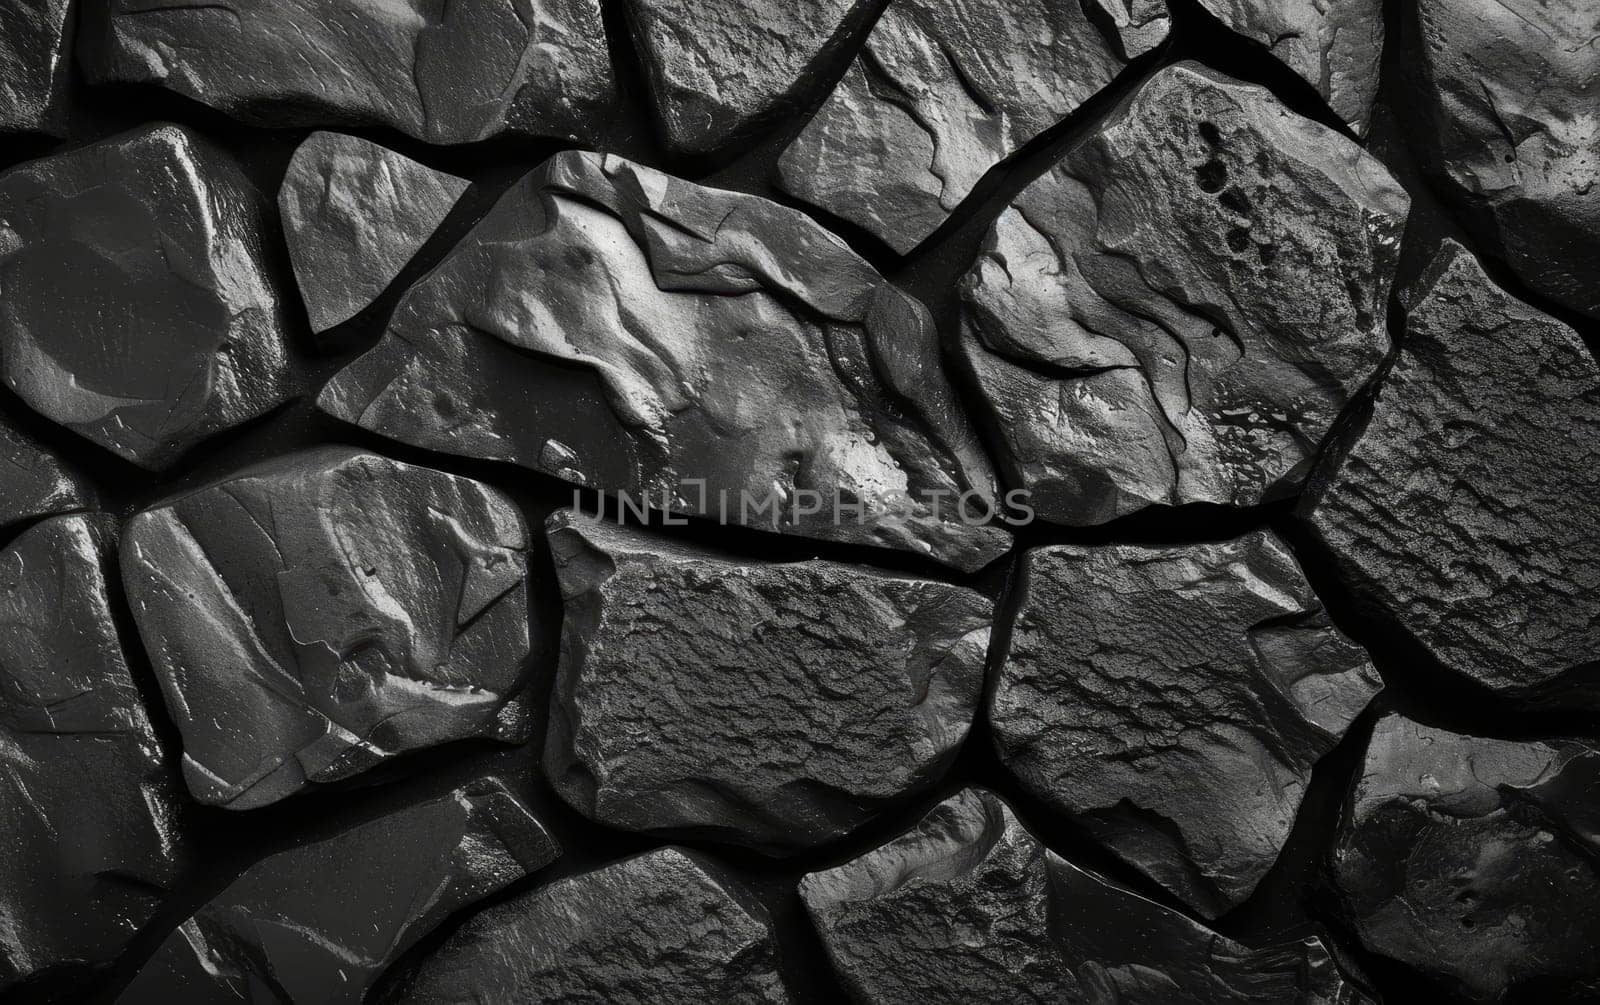 Close-up view of a pile of coal with a rough, irregular shape and texture